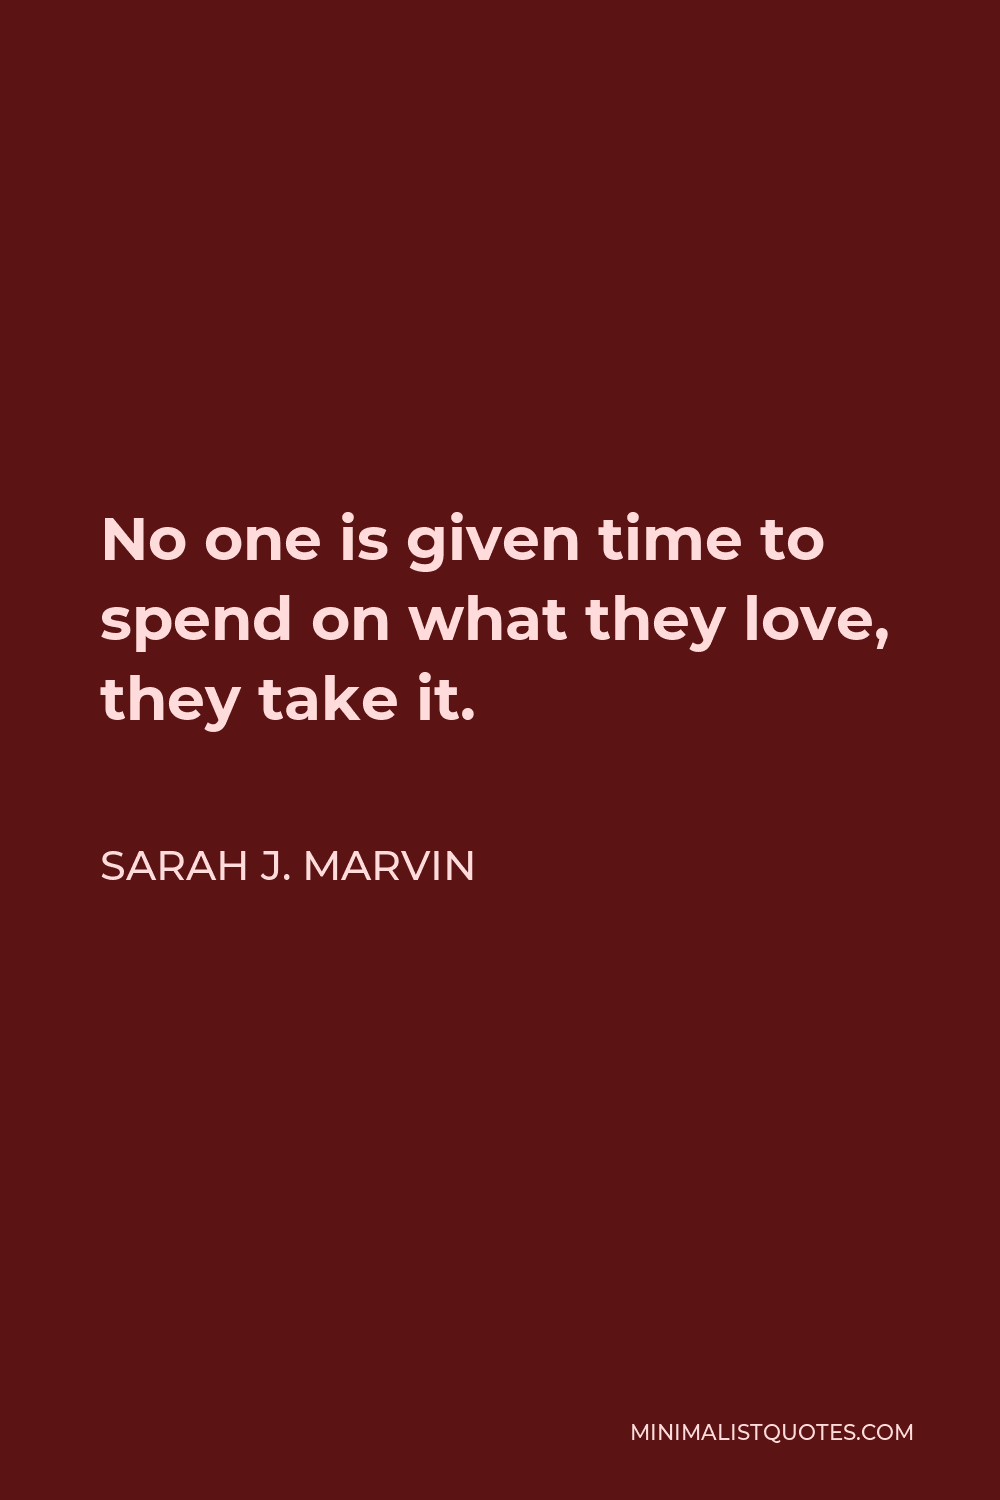 Sarah J. Marvin Quote - No one is given time to spend on what they love, they take it.